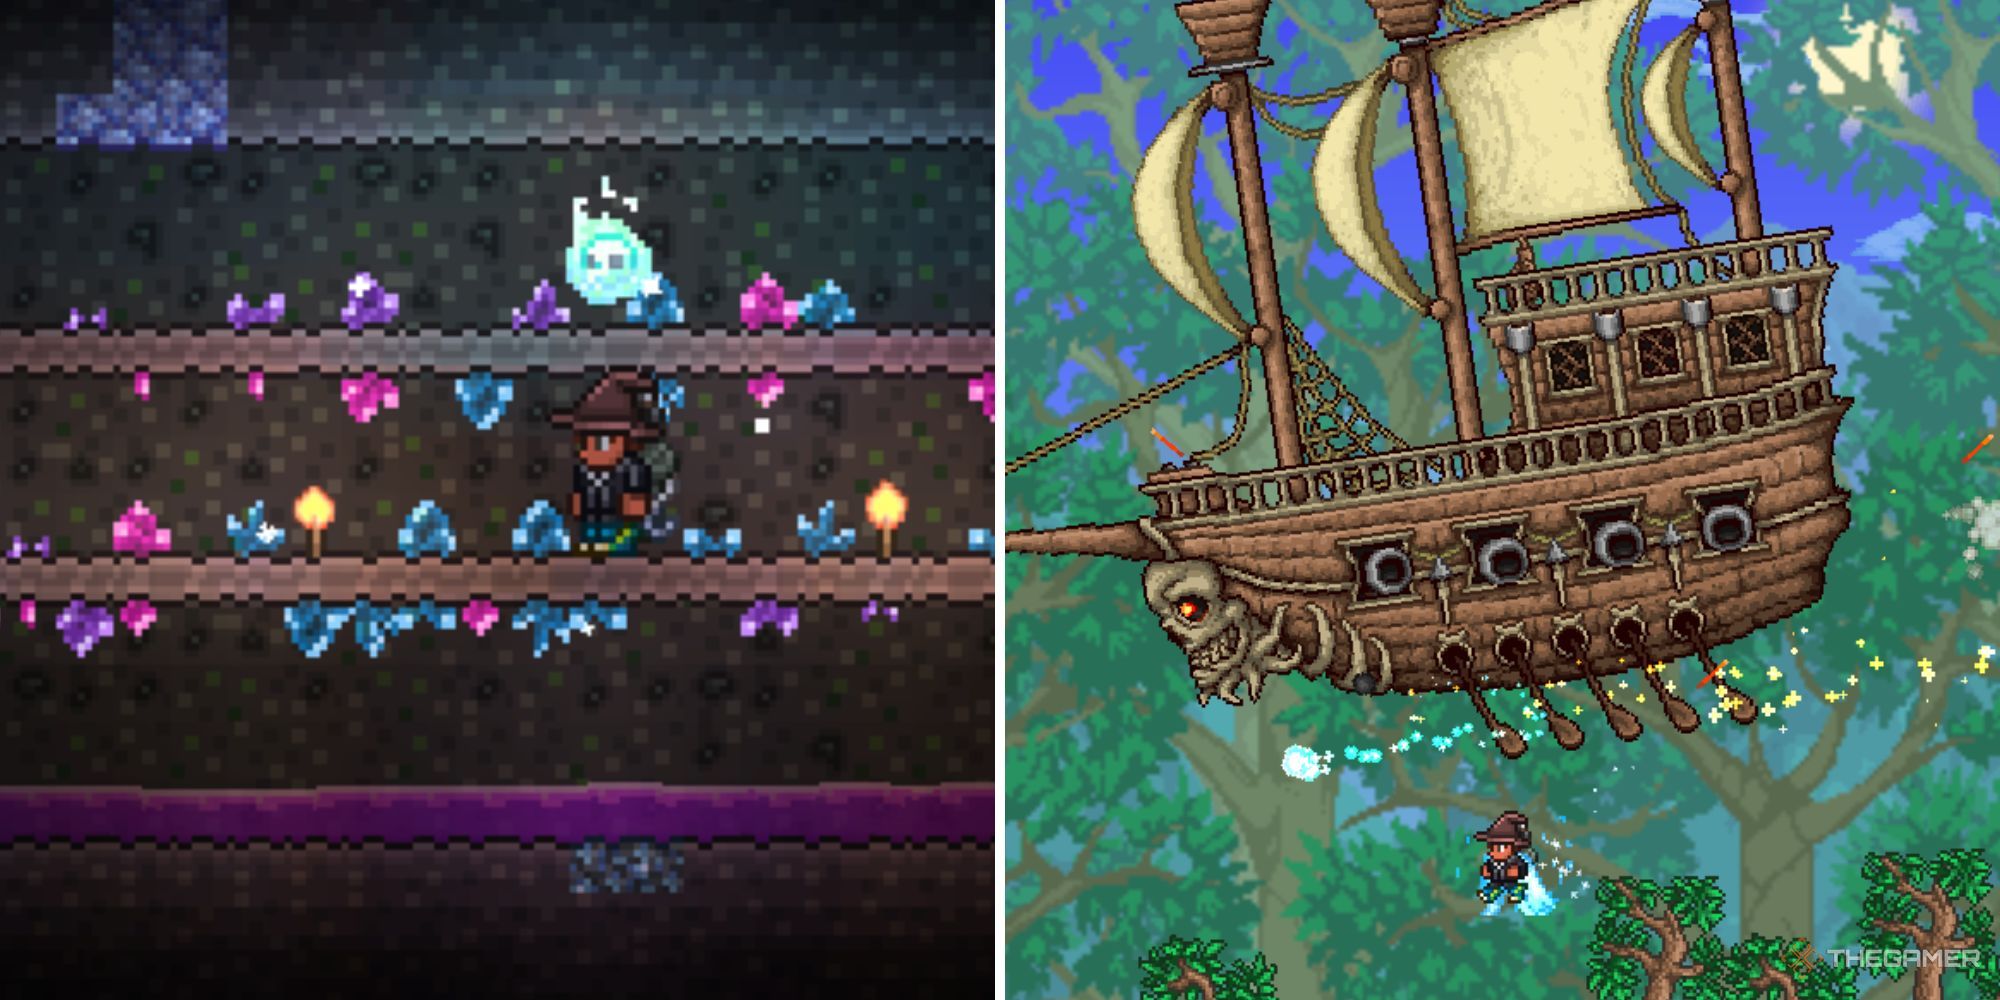 A split image of a flying, wood pirate ship with cannons, and a player underground surrounded by shiny, blue, purple, and pink crystals.